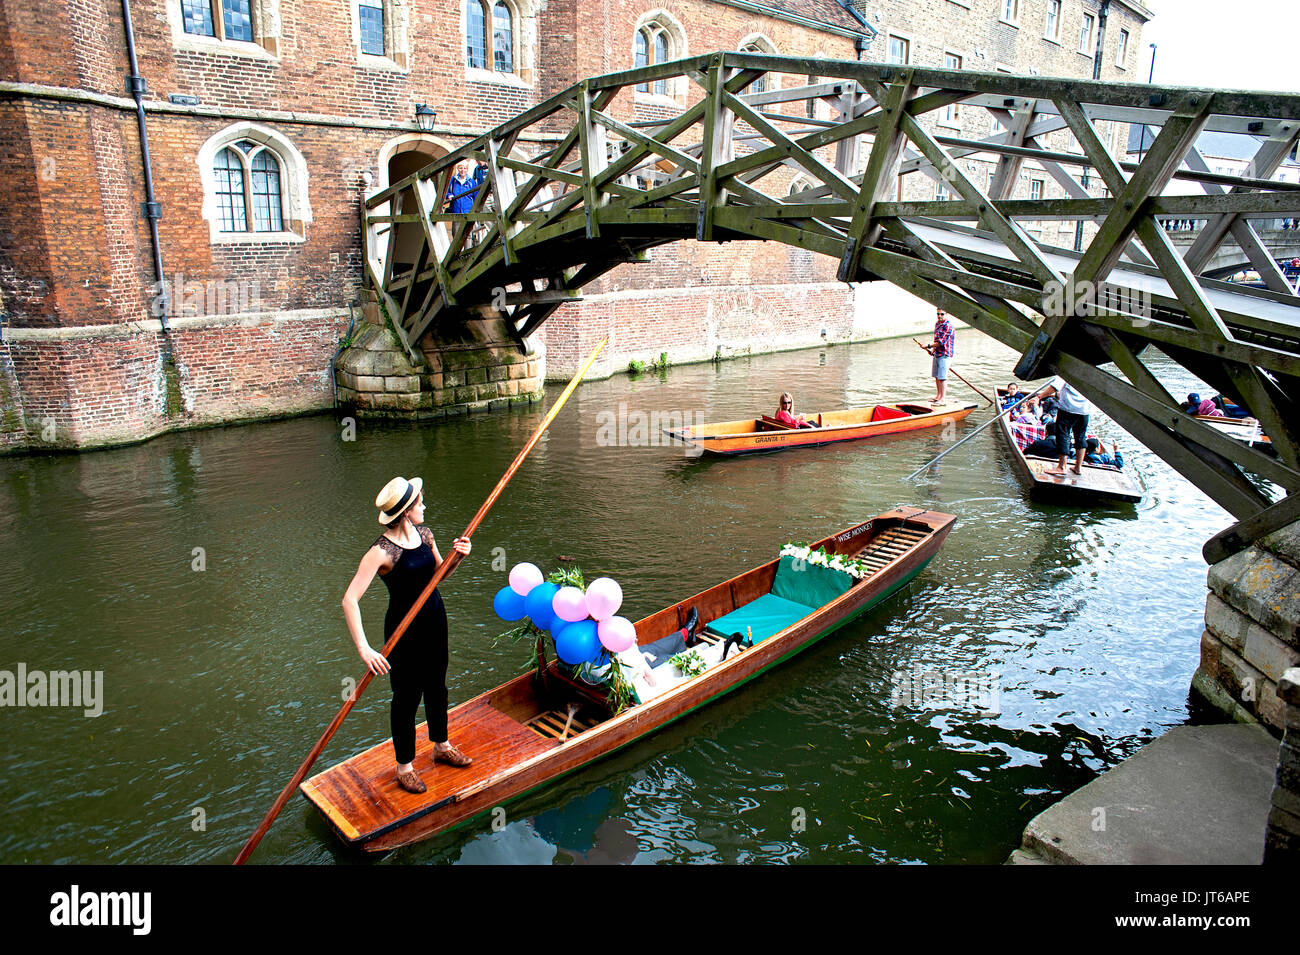 A newly married couple take a river punt in Cambridge passing under the famous mathematical bridge at Queen's College, part of Cambridge University. Stock Photo